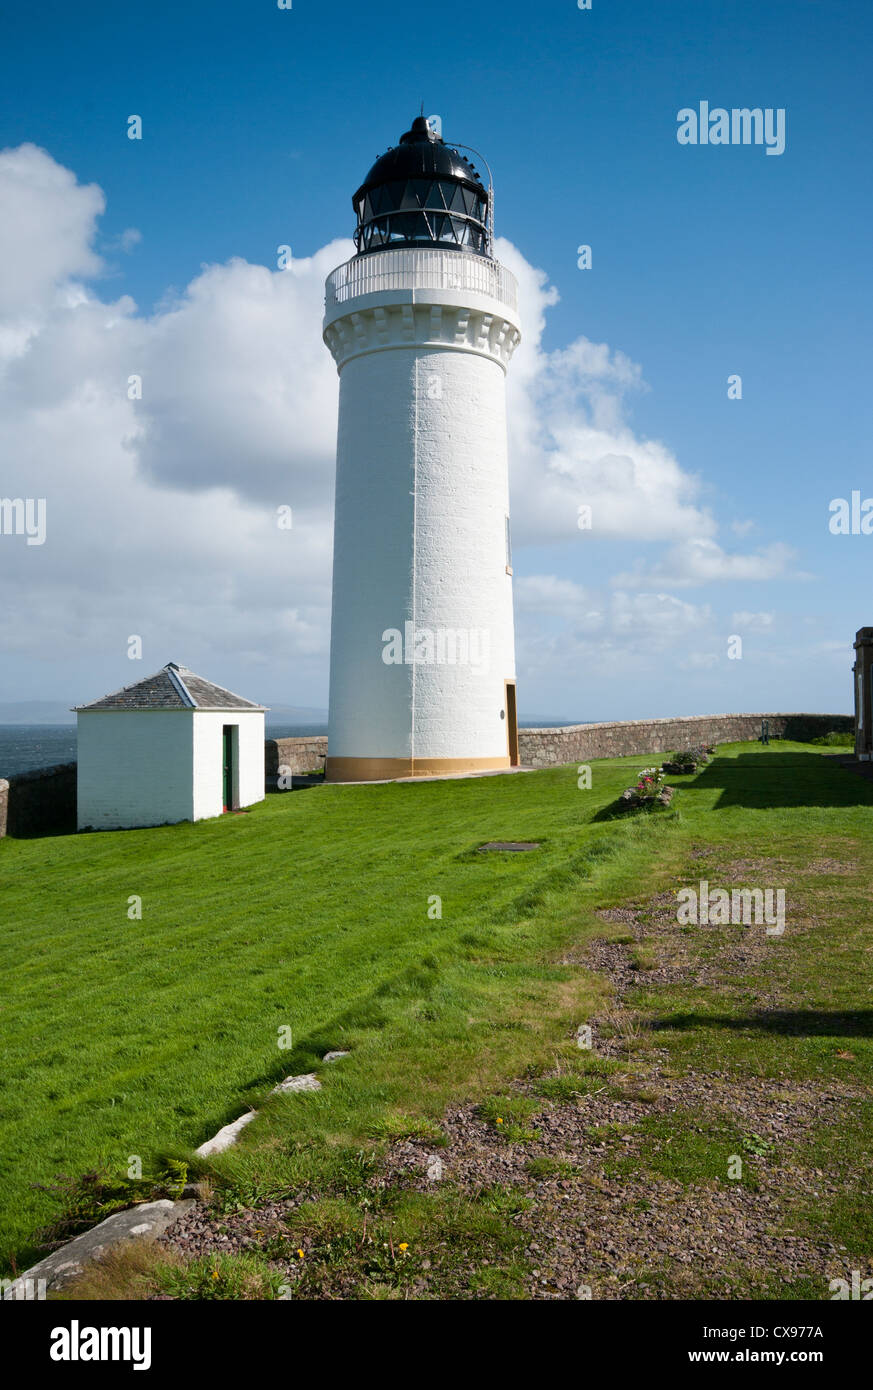 Davaar Lighthouse On Davaar Island In Campbeltown Loch Off The Kintyre Peninsula Argyll and Bute Scotland Stock Photo